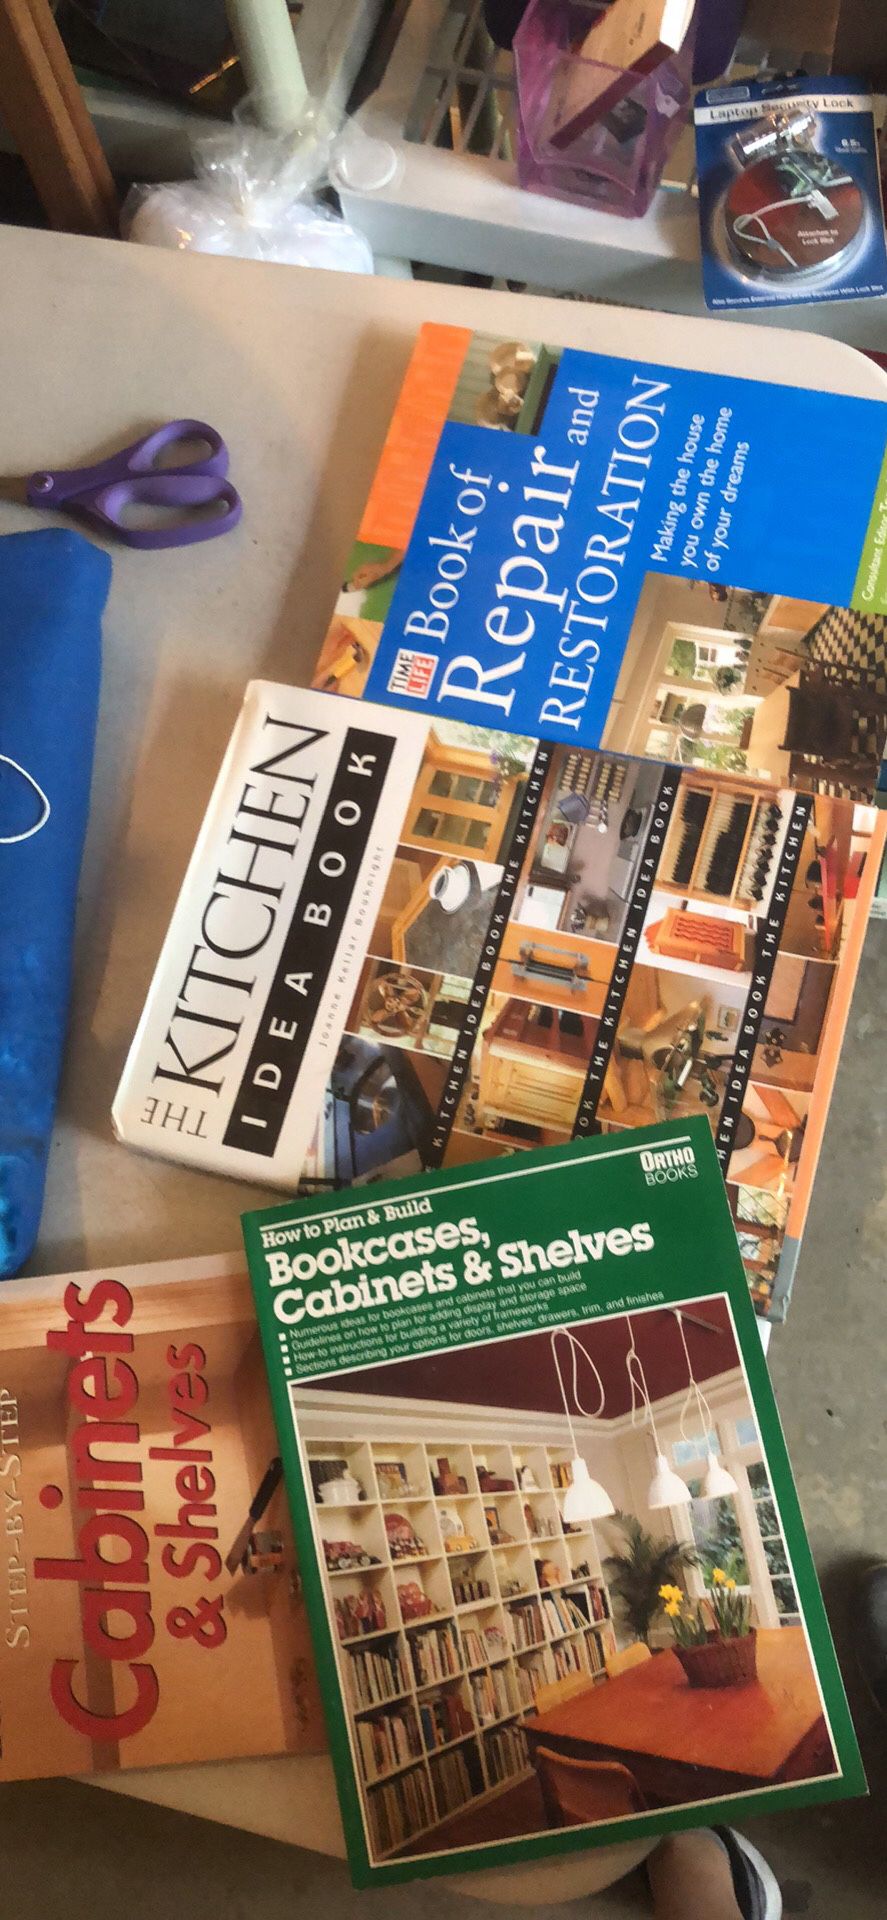 Remodel and Carpentry books - lot of 4